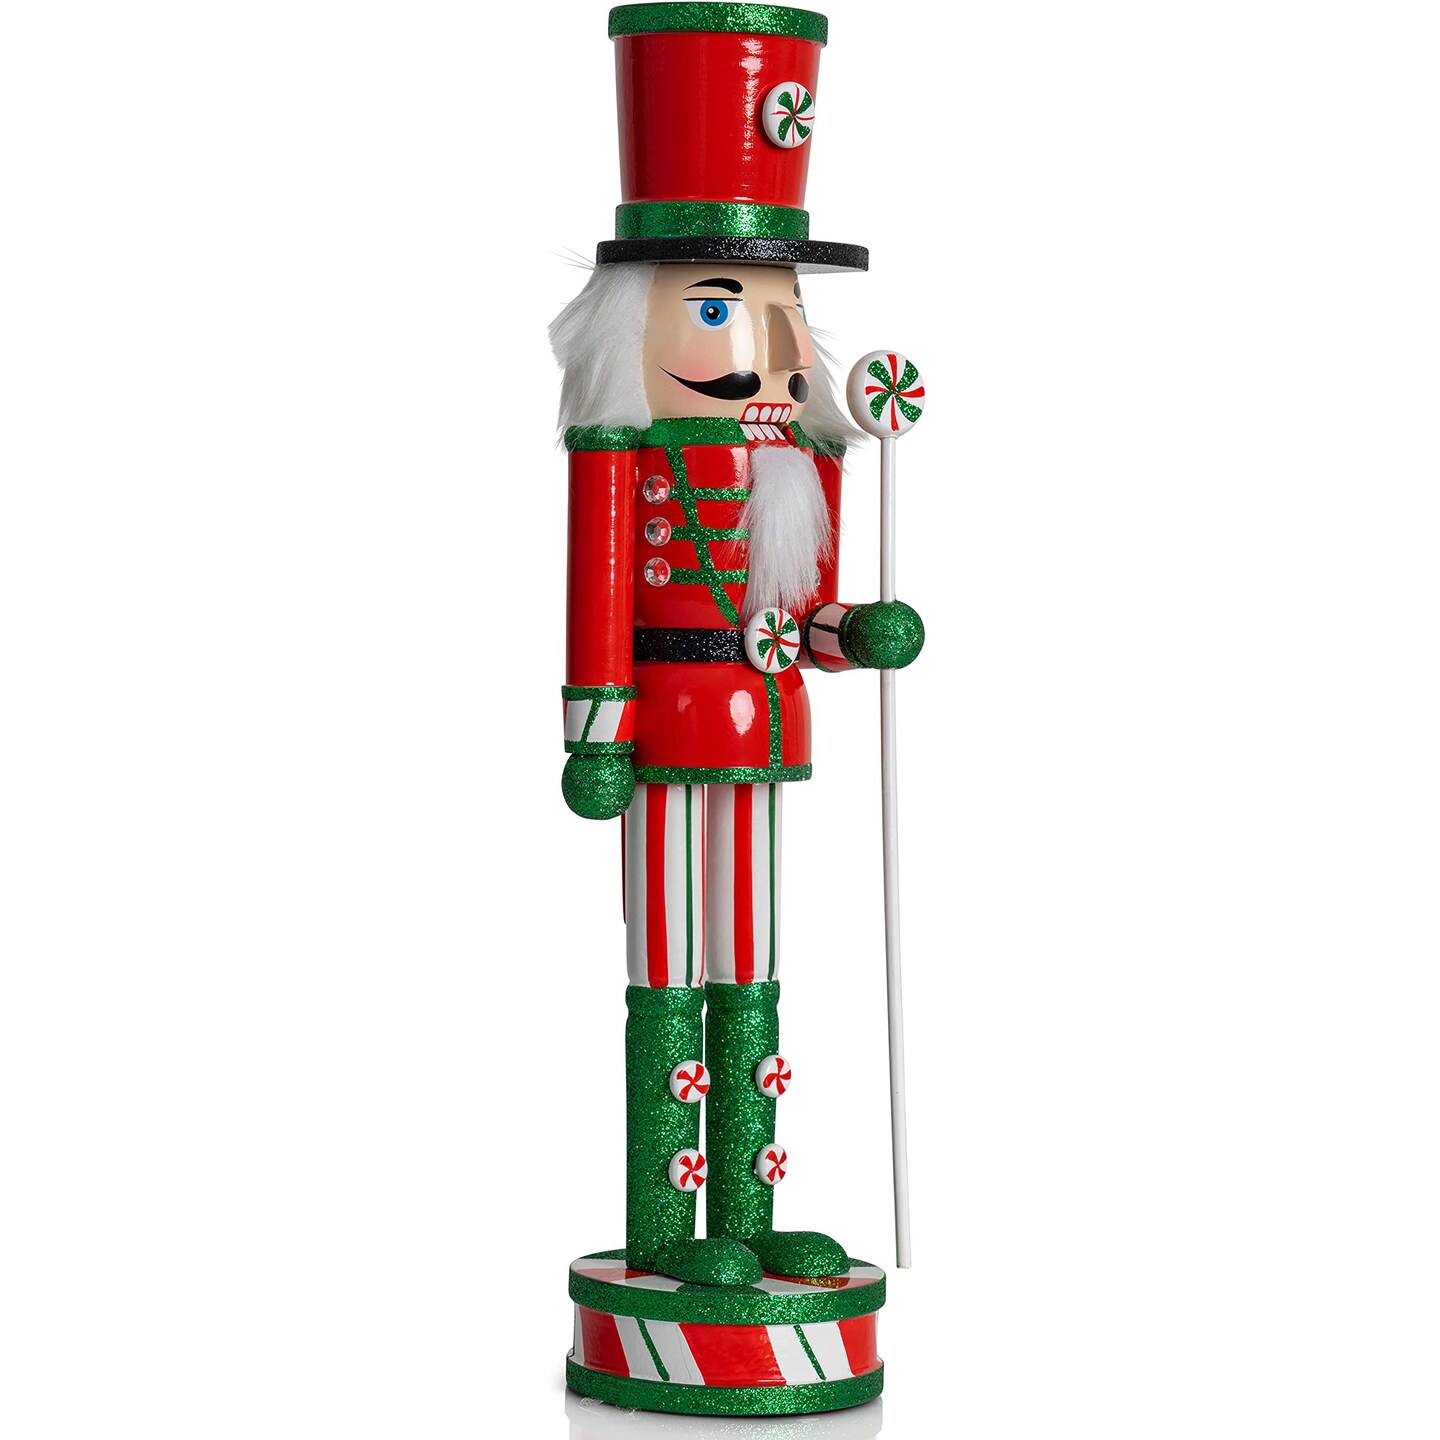 Ornativity Wooden Peppermint Christmas Nutcracker - Red, White and Green Glitter Candy Themed Holiday Nut Cracker Doll Figure Toy Soldier Decorations